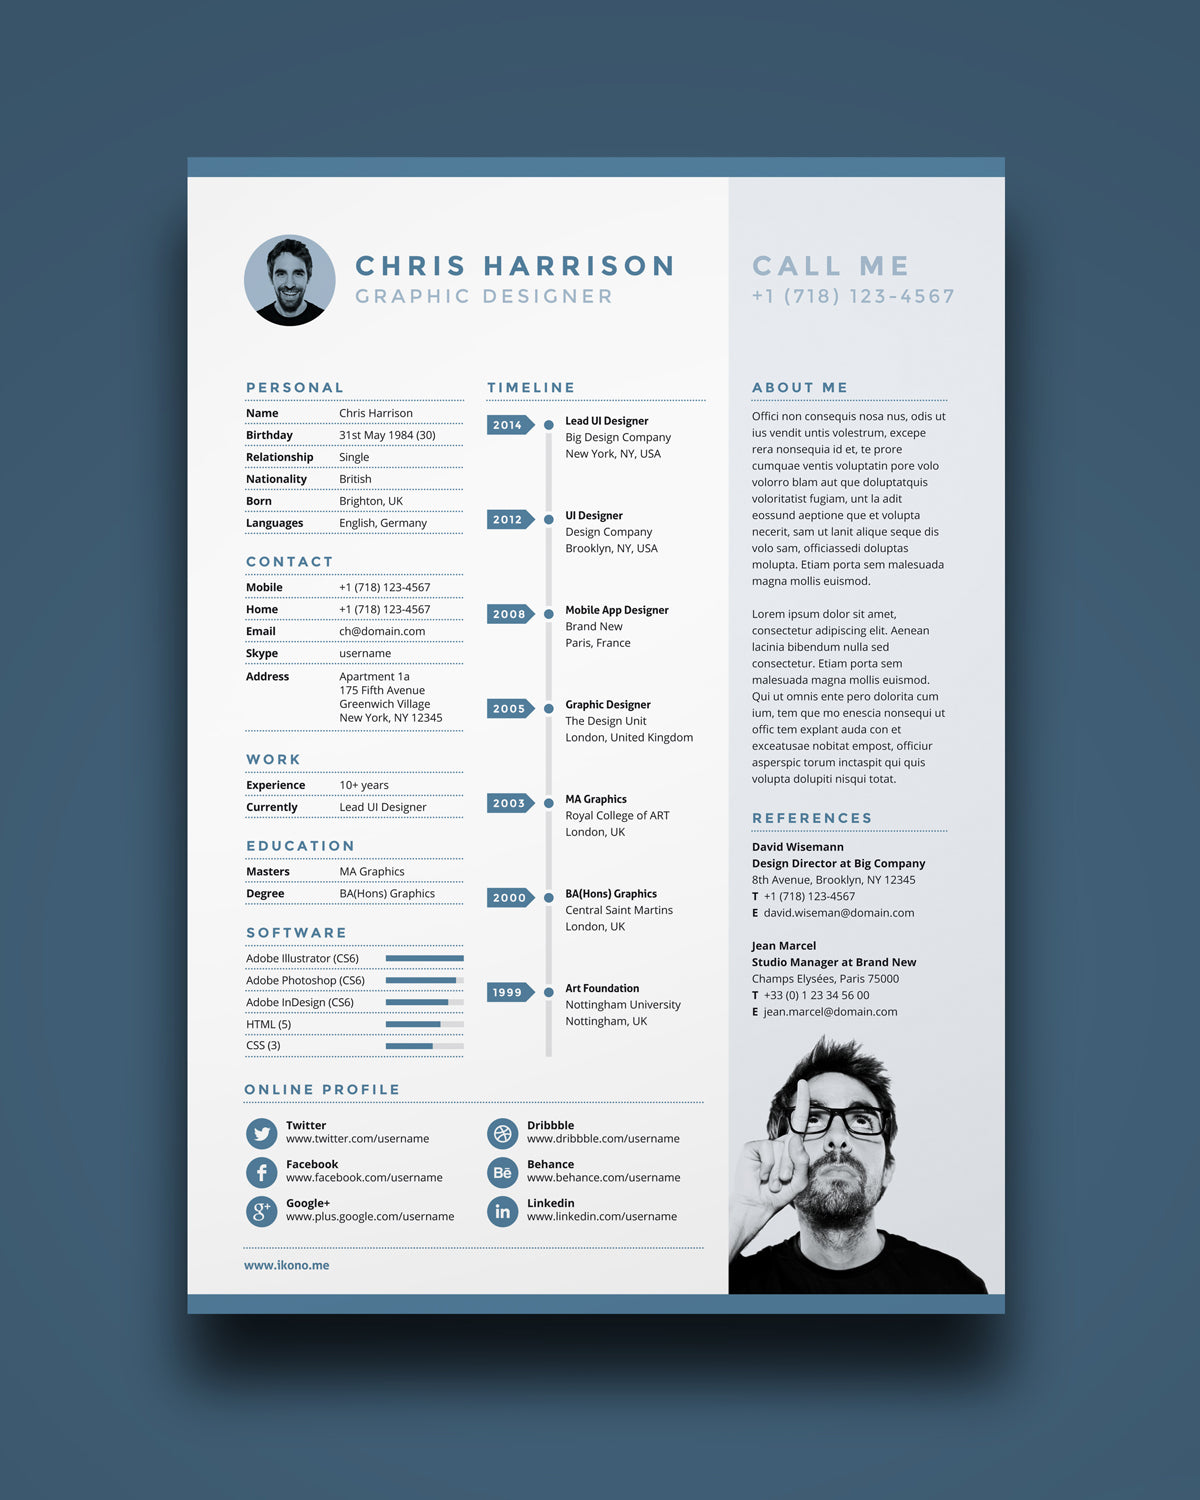 Free Resume Template in Photoshop (PSD) Illustrator (AI) and Indesign